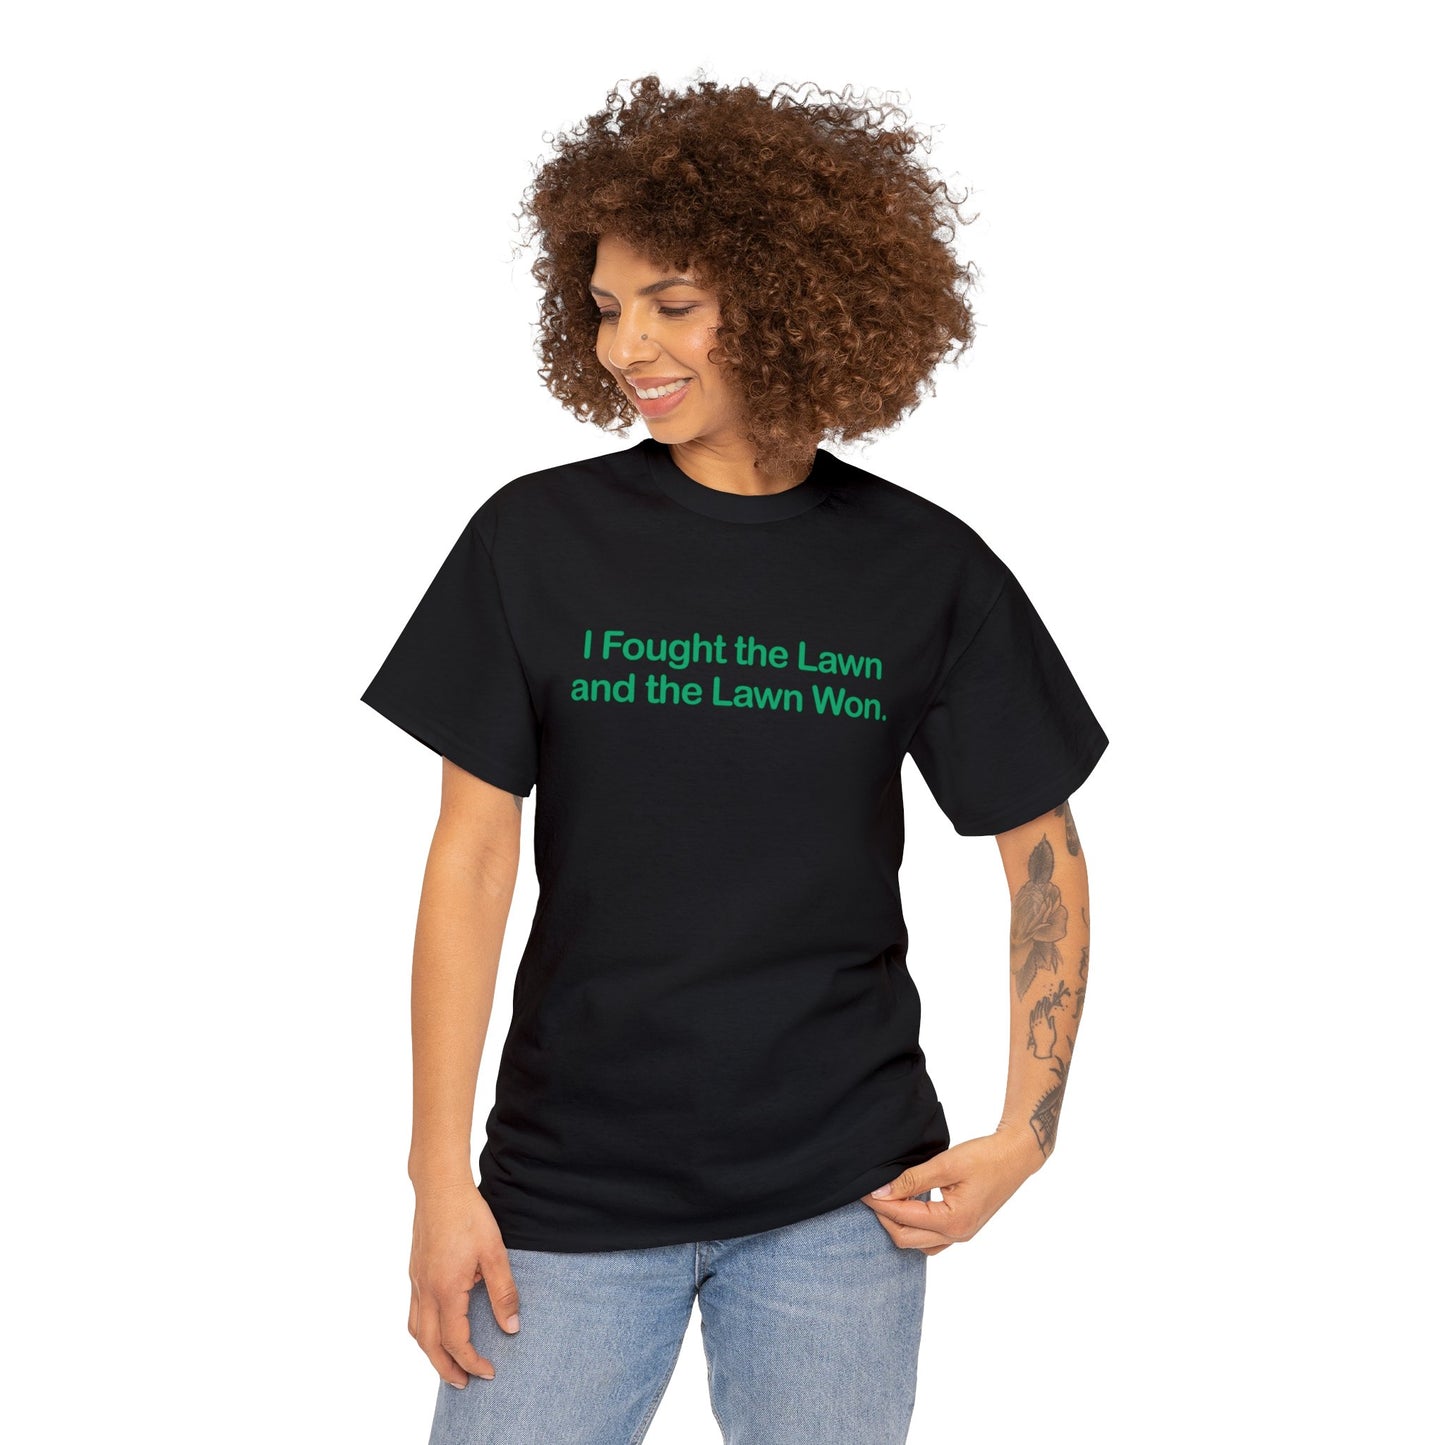 I Fought the Lawn and the Lawn Won, Funny T-Shirt, Lawnmowing t-shirt, Fun Dad Gift, Funny Dad T-shirt, Dad Lawn Humor, Father's Day Gift